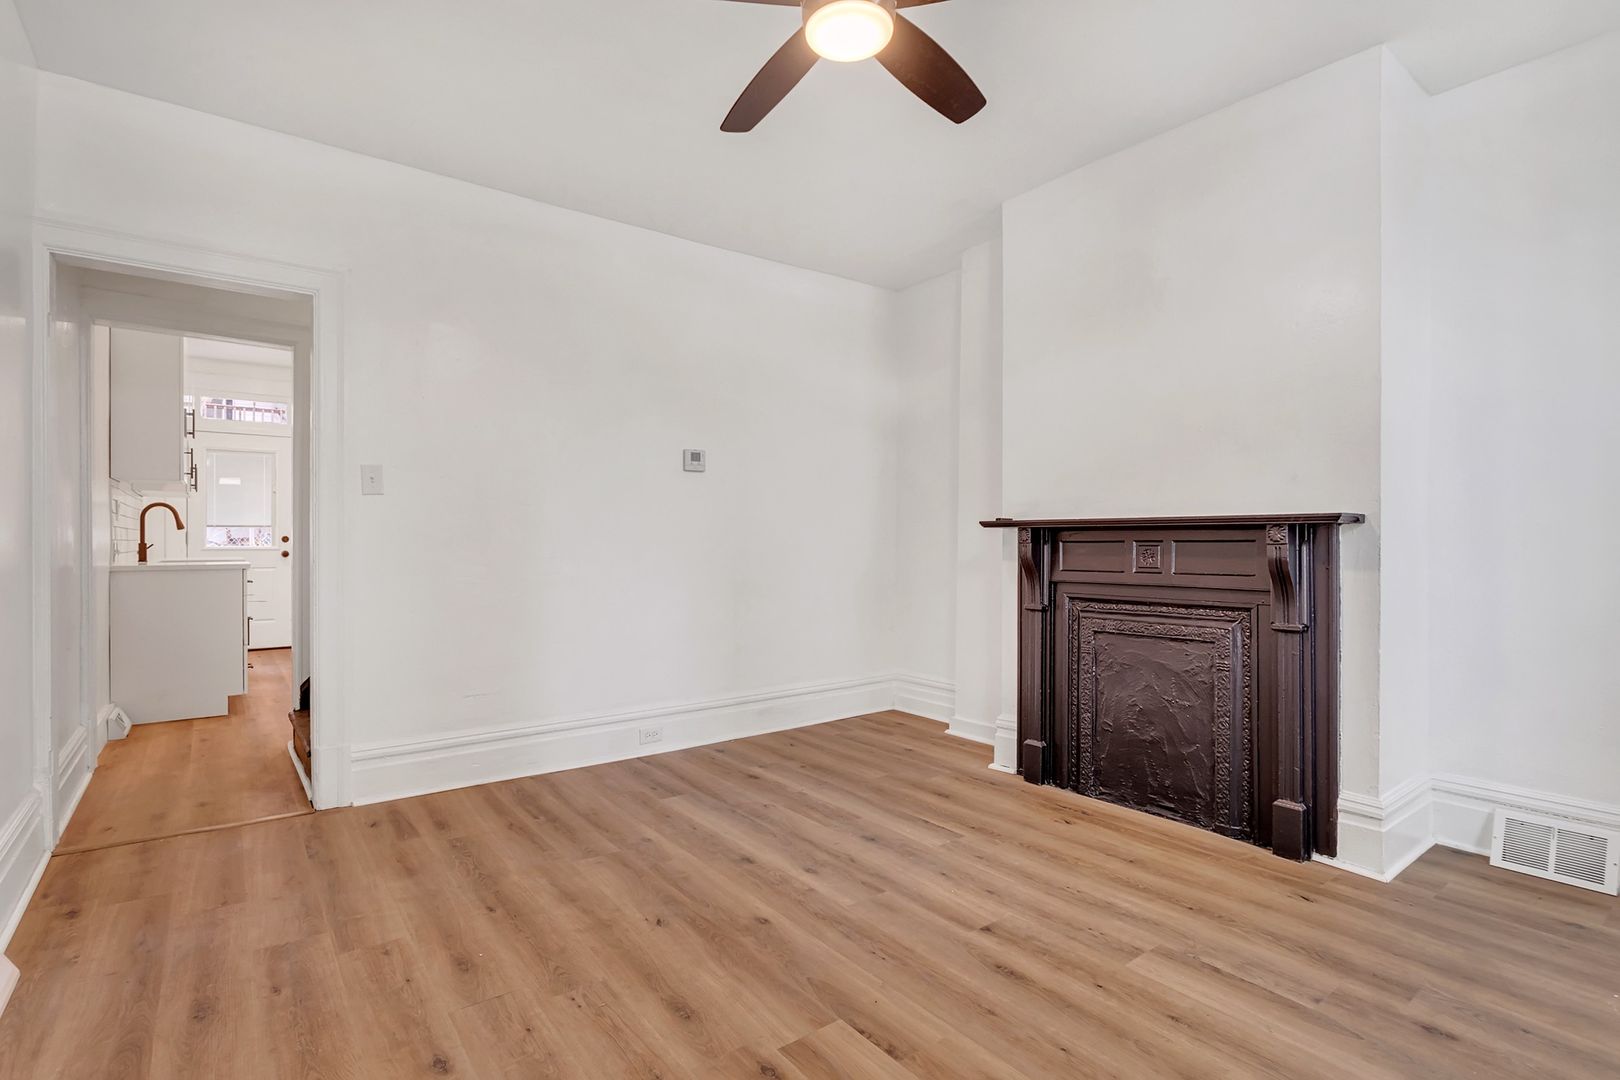 Three Bedroom One Bath Home Available in Upper Lawrenceville!